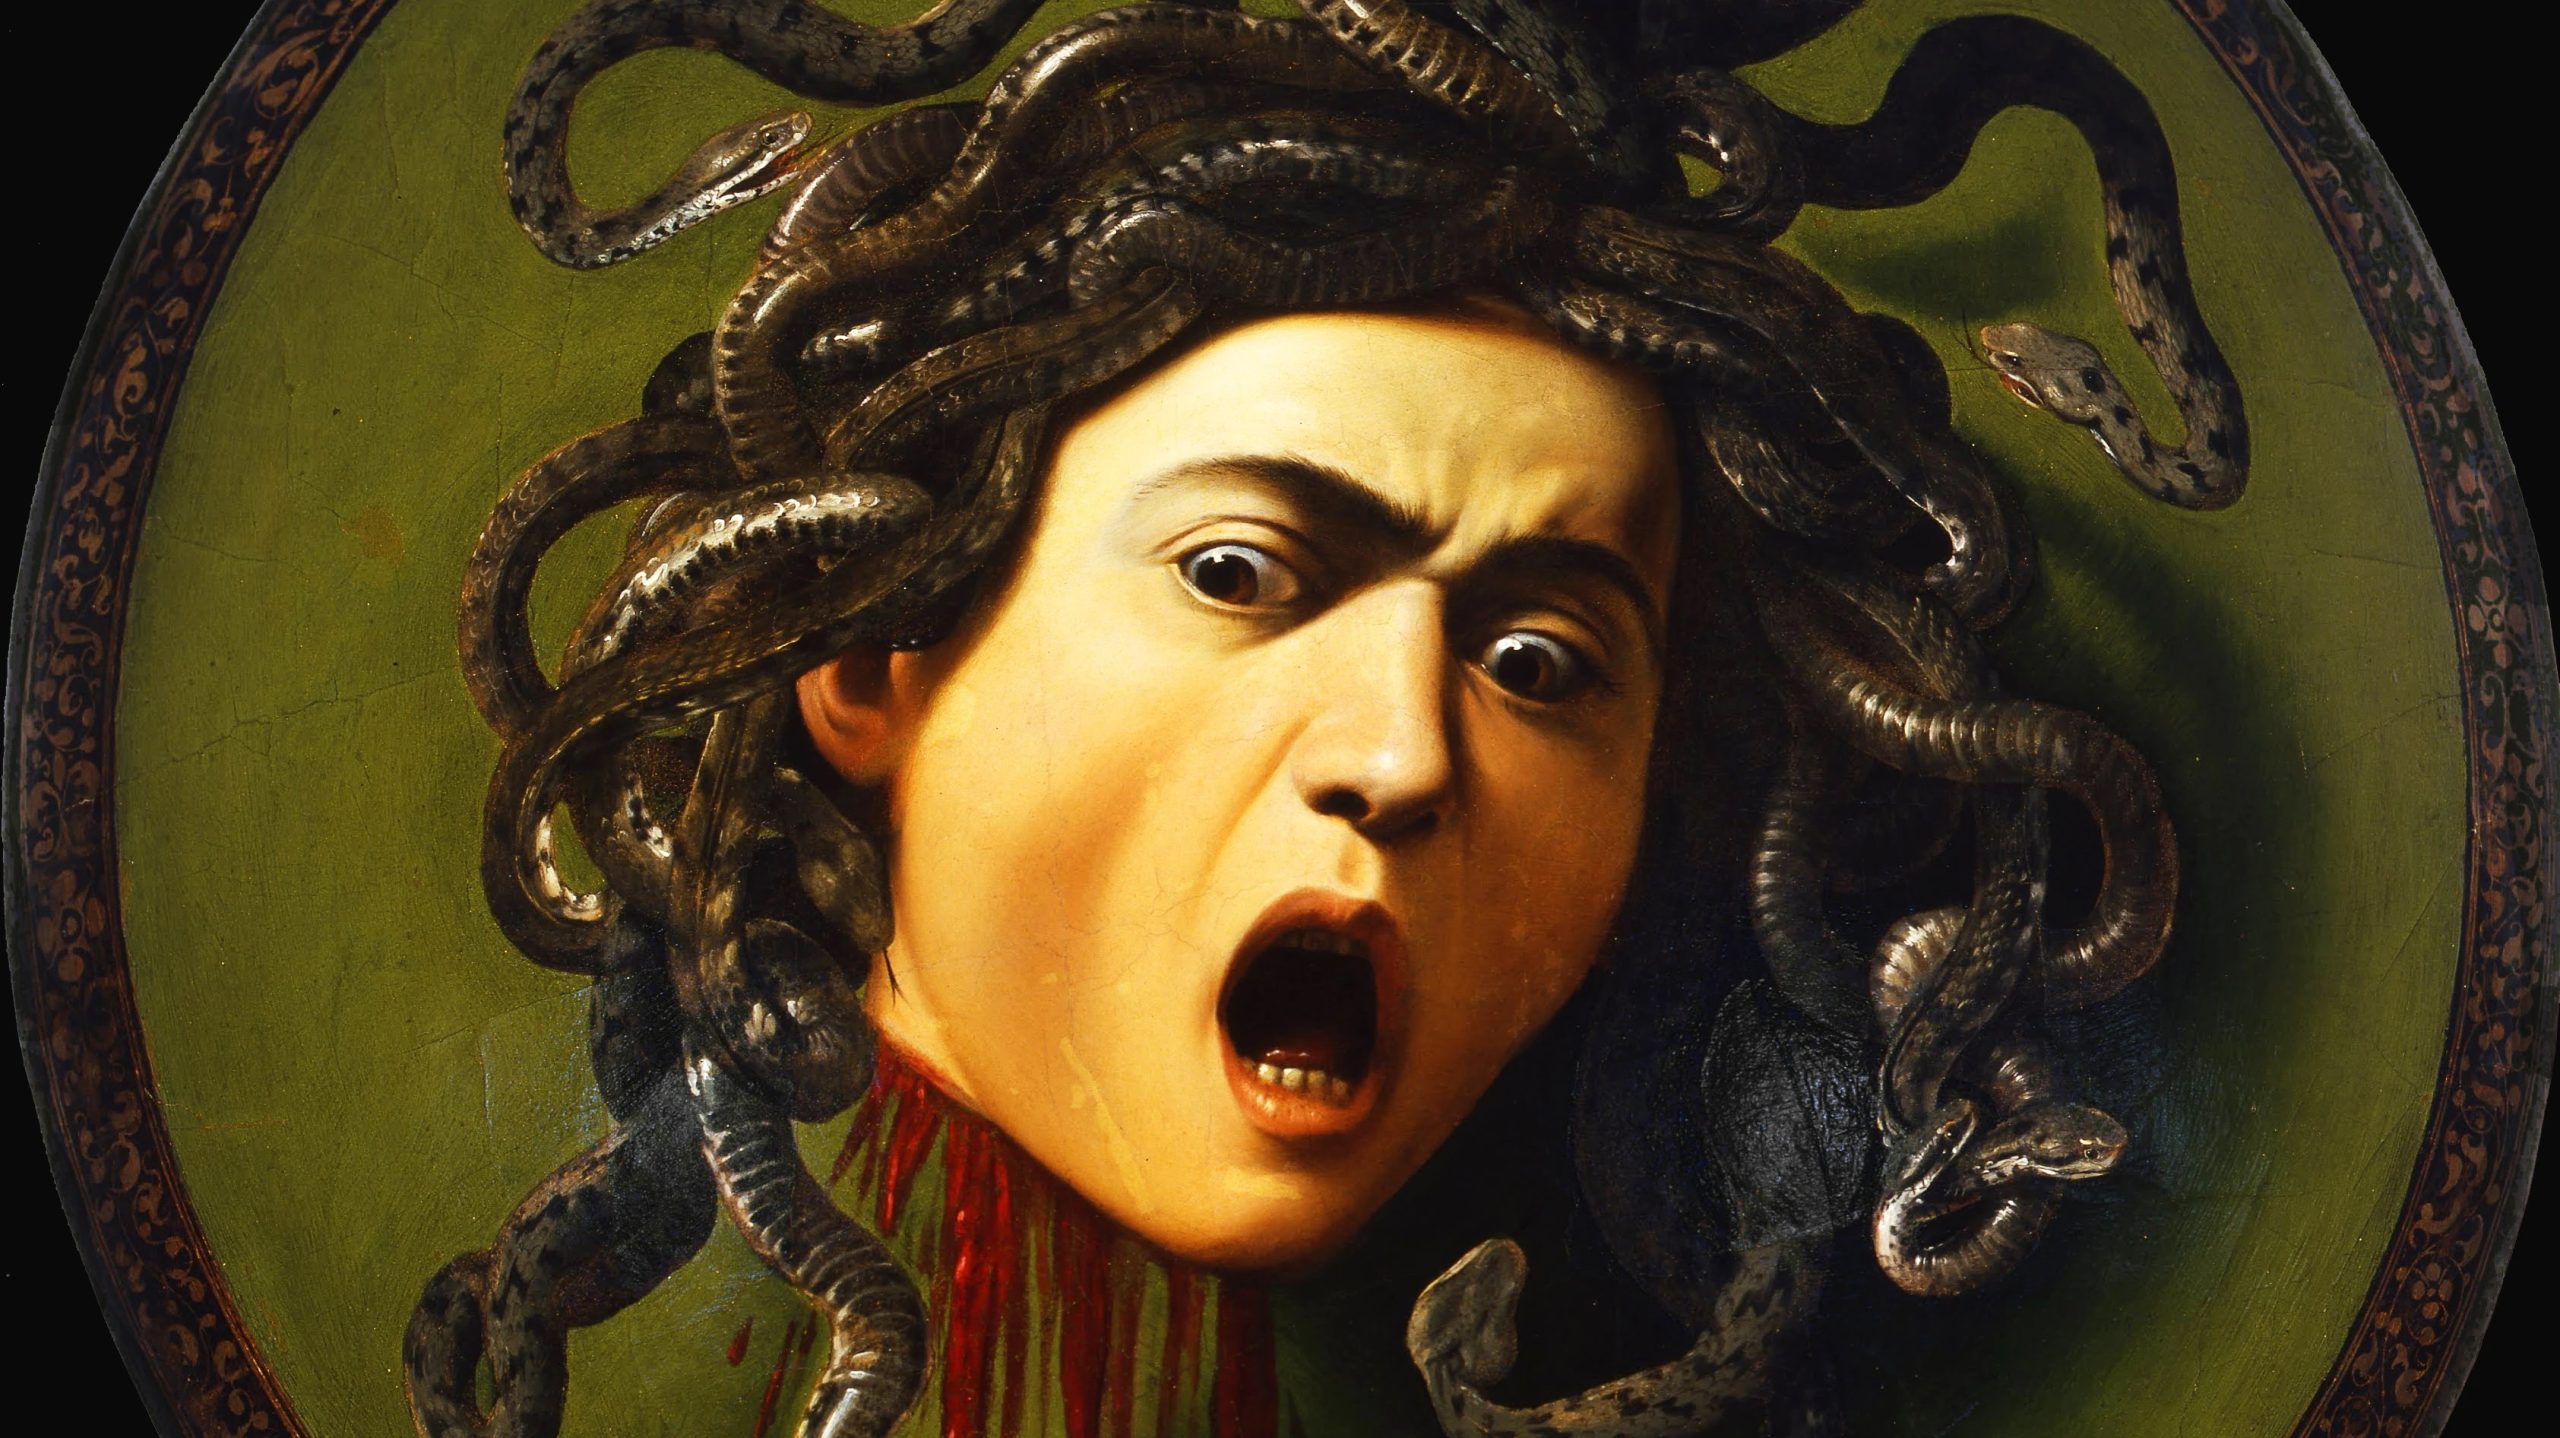 Medusa depicted headless in classical painting